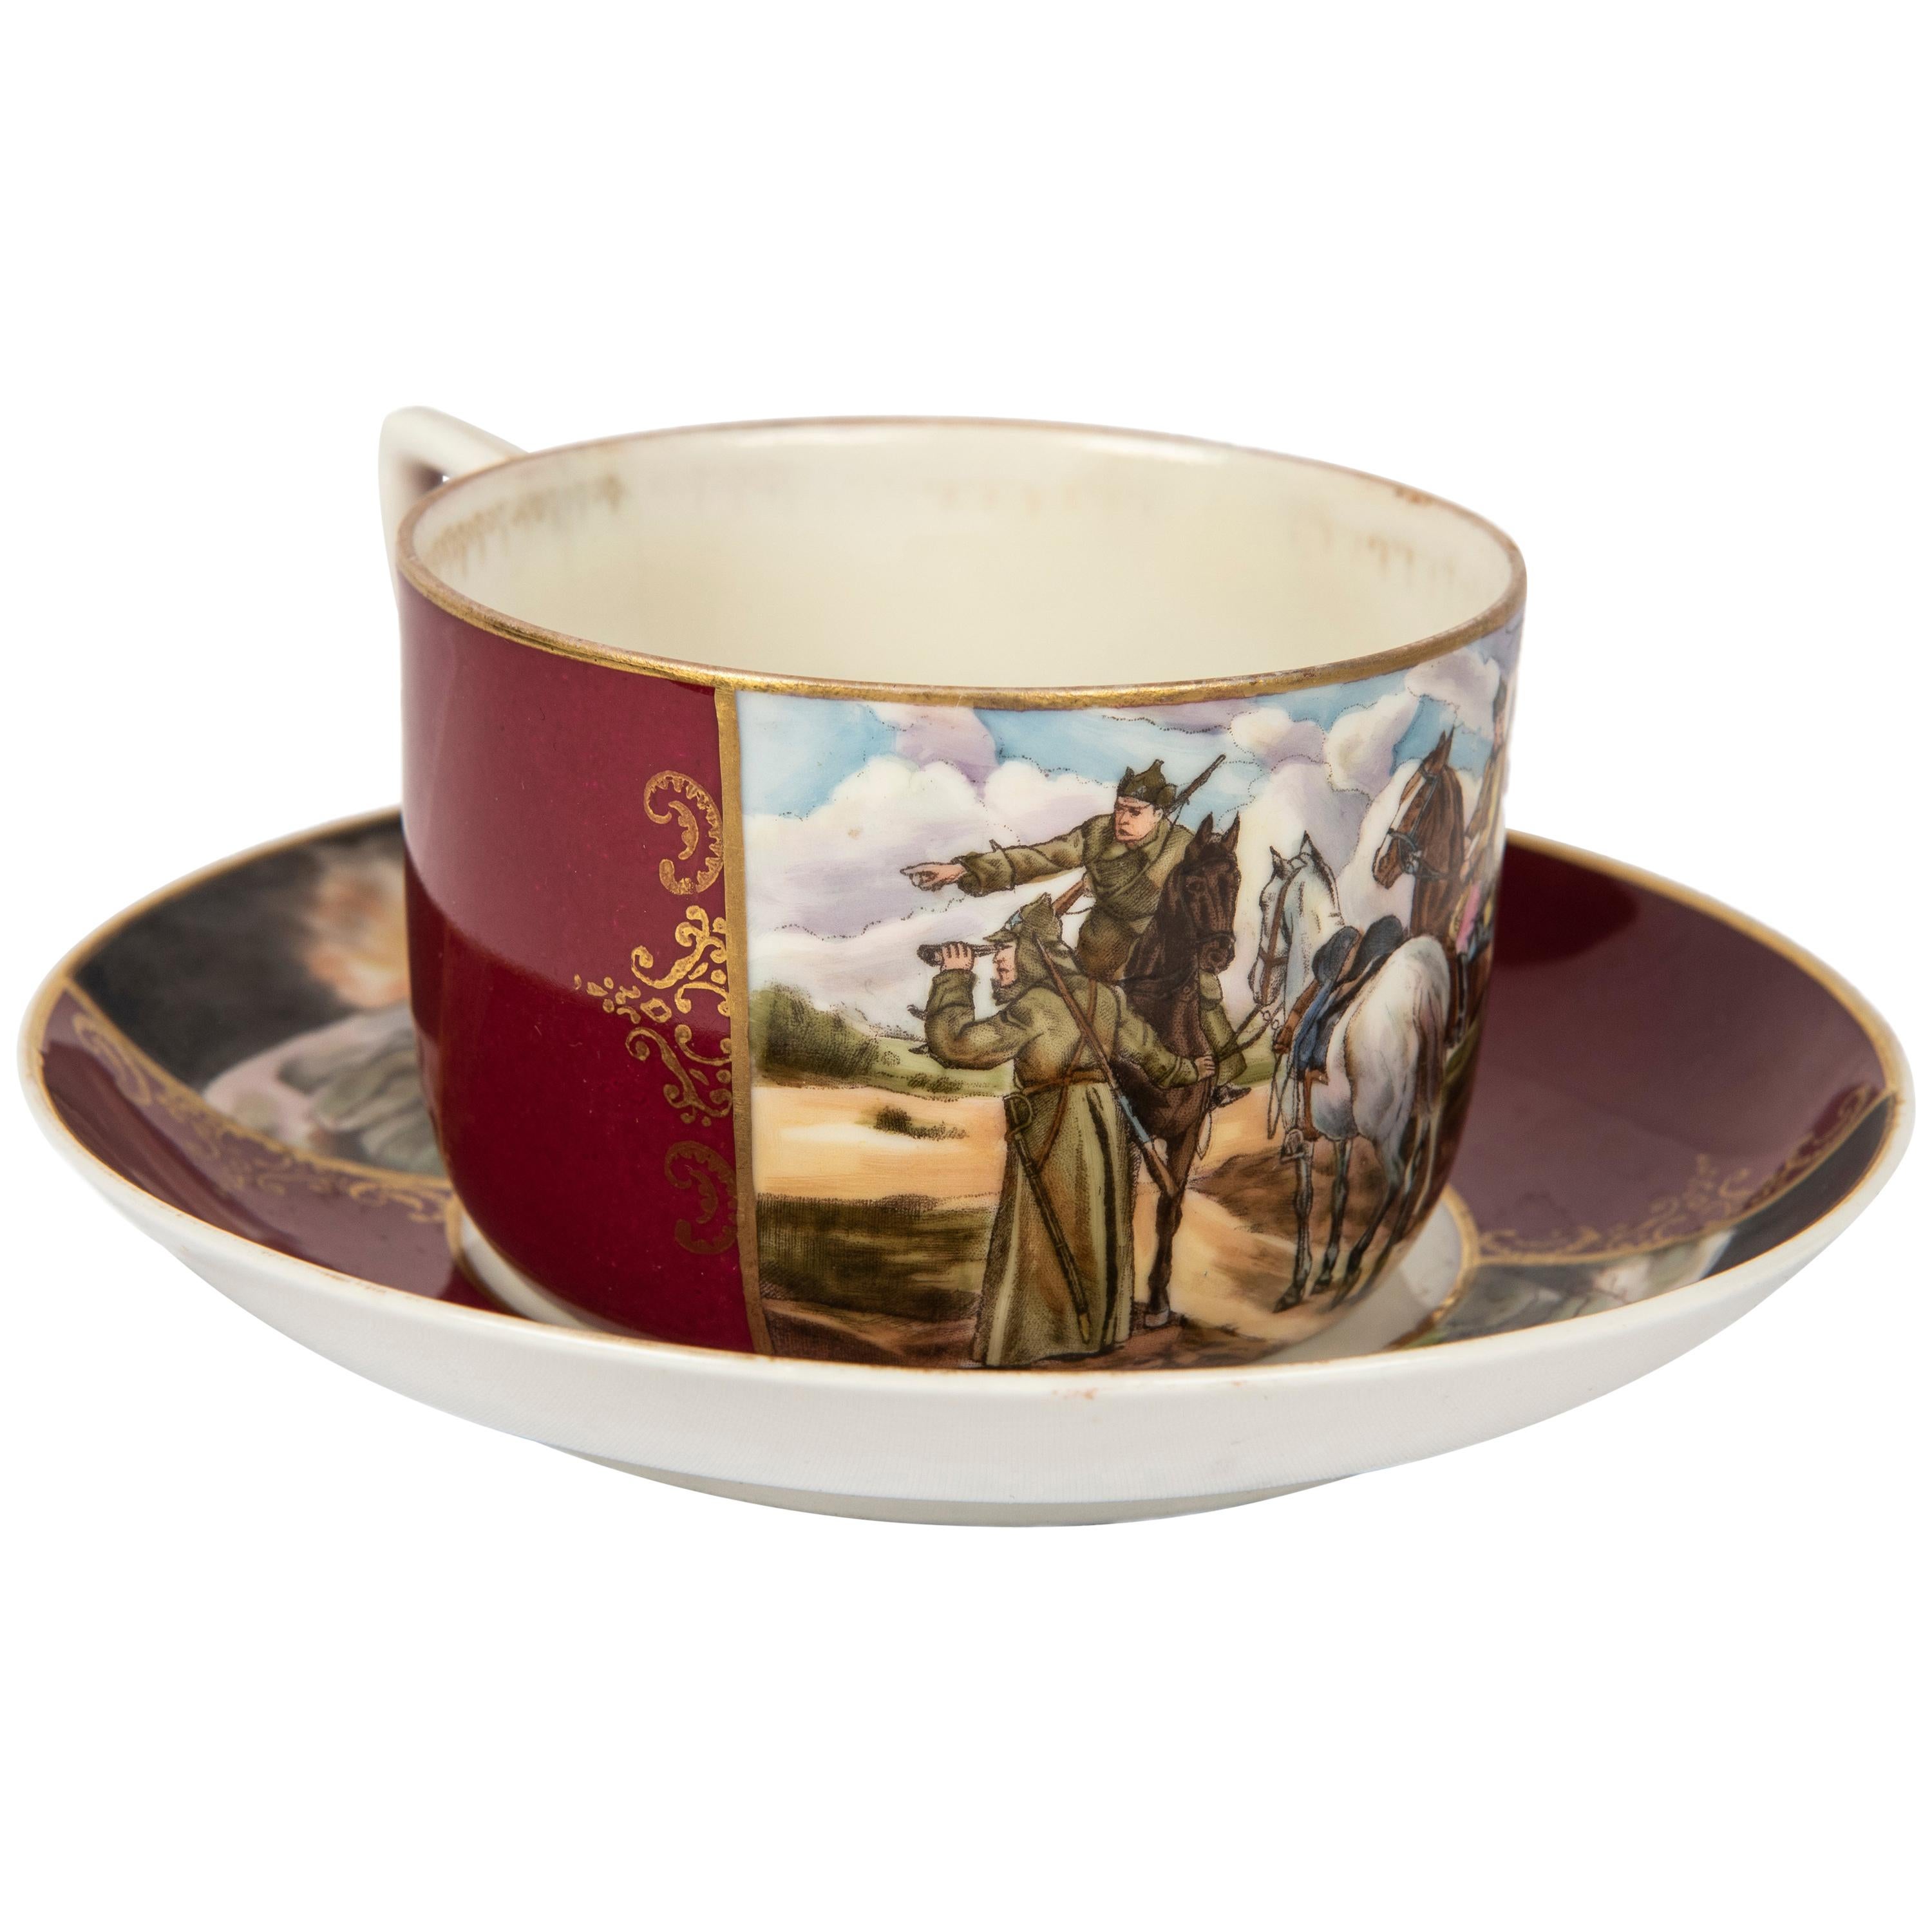  Russian Civil War Commemorative Porcelain Cup and Saucer For Sale